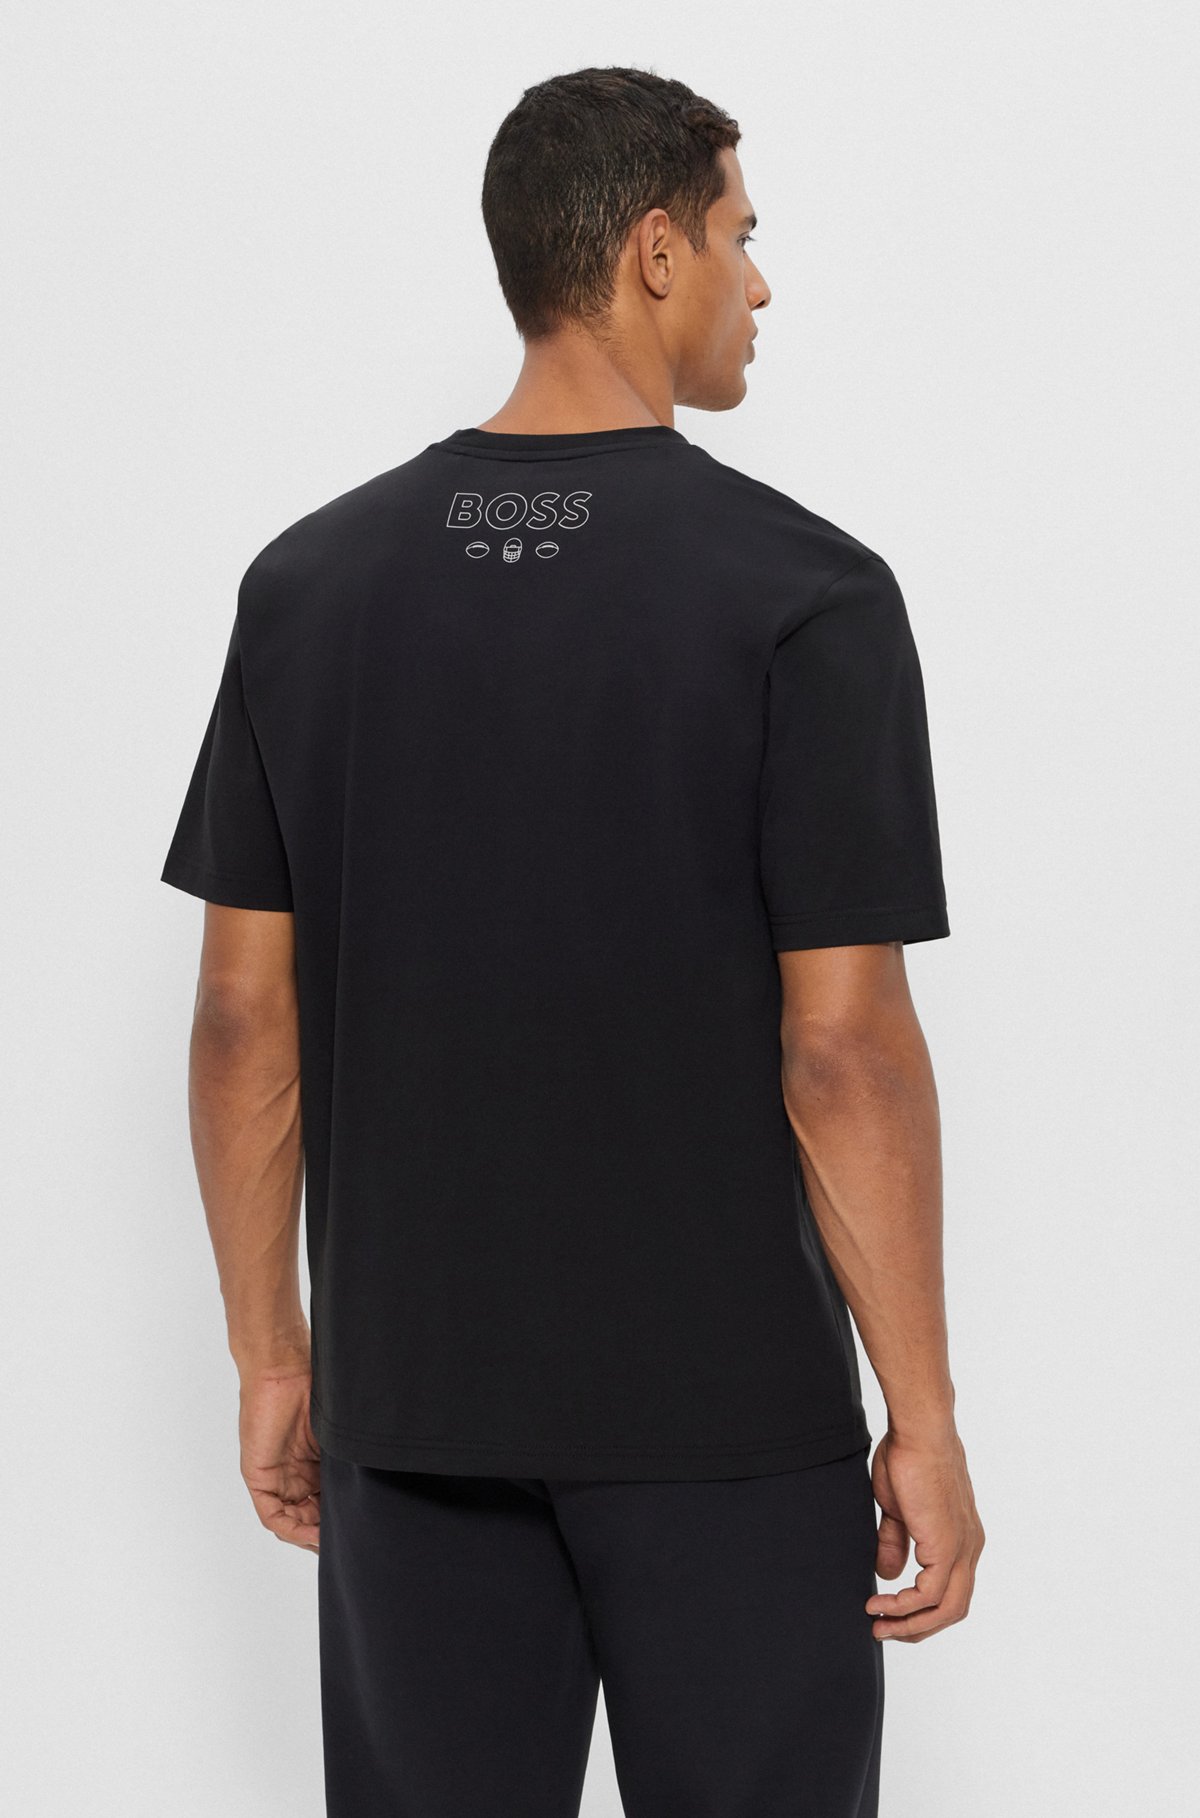  BOSS x NFL stretch-cotton T-shirt with collaborative branding, Lions